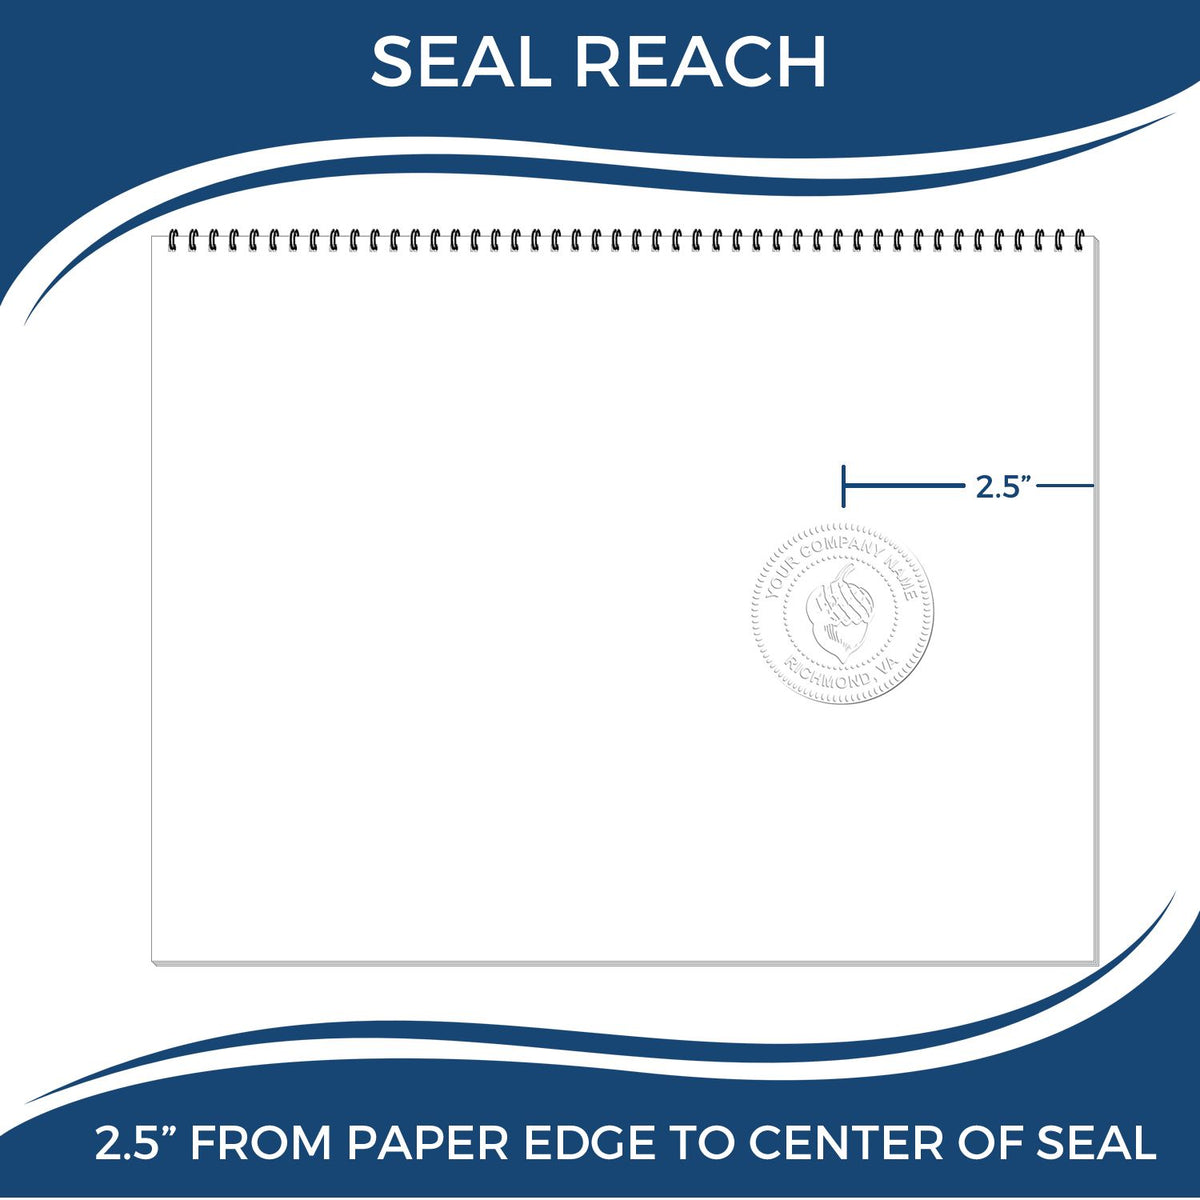 An infographic showing the seal reach which is represented by a ruler and a miniature seal image of the Long Reach Vermont PE Seal